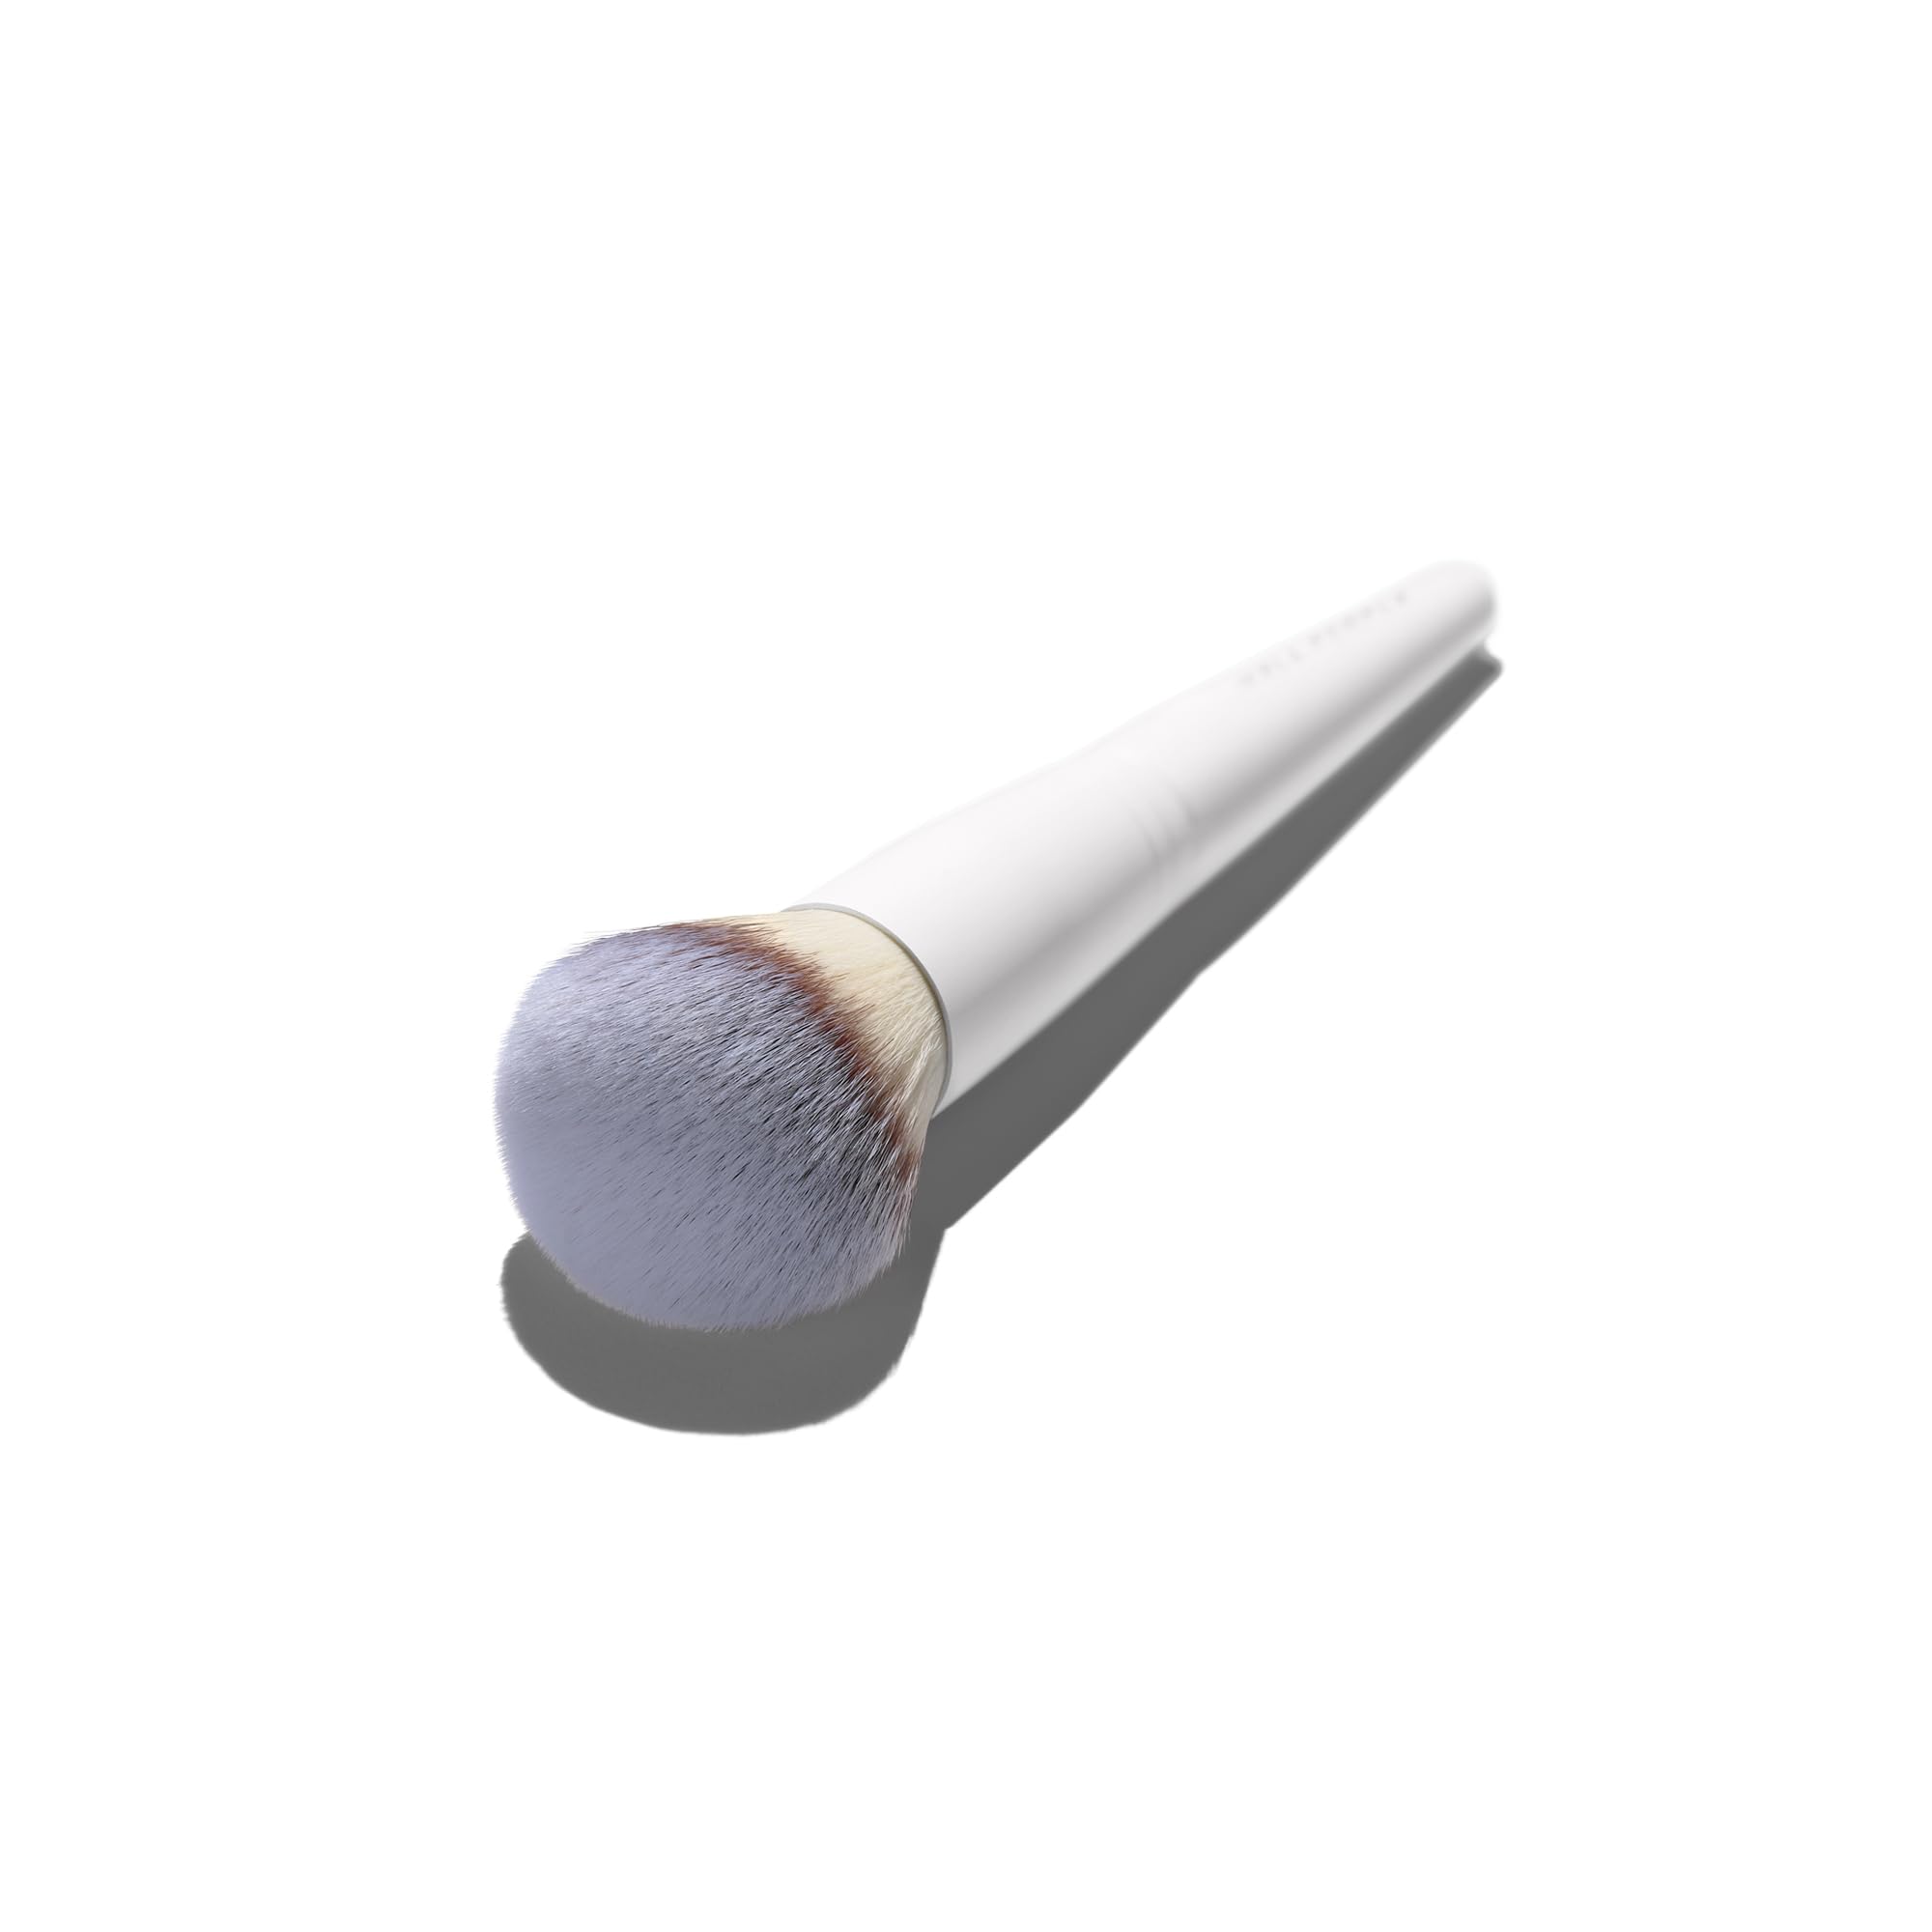 Well People Buffing Brush, Dome-shaped Soft Makeup Brush For Blending, Blurring & Buffing For An Airbrushed Complexion, Cruelty-free Bristles